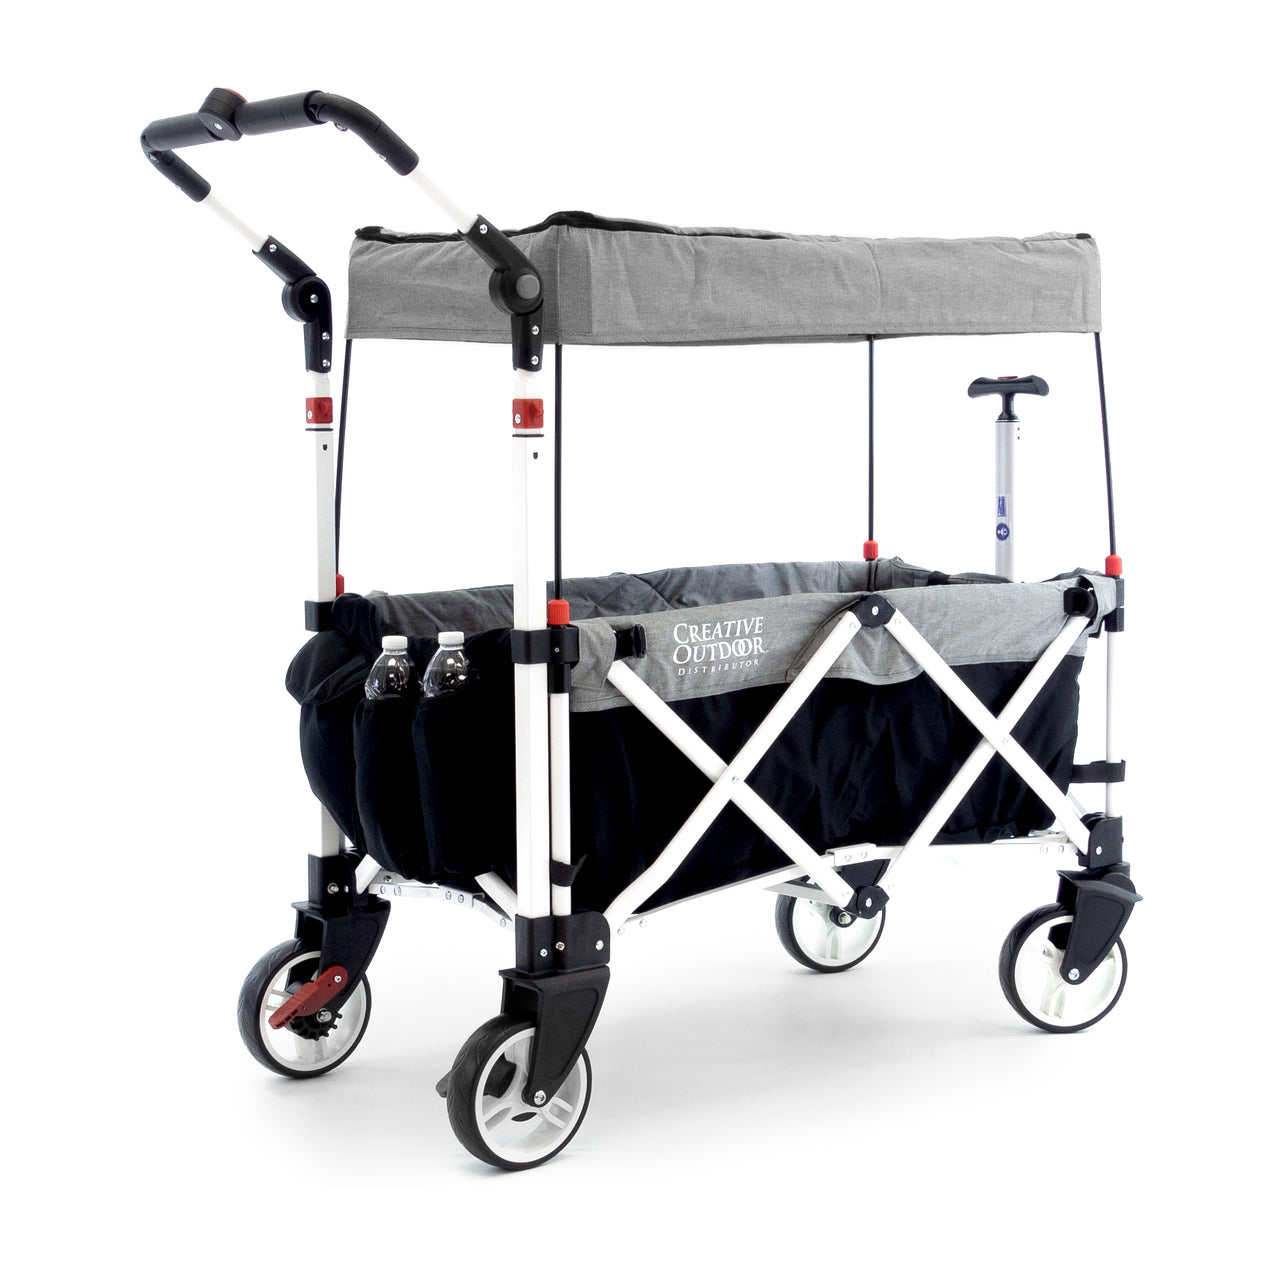 pack-and-push-folding-stroller-wagon-black-gray